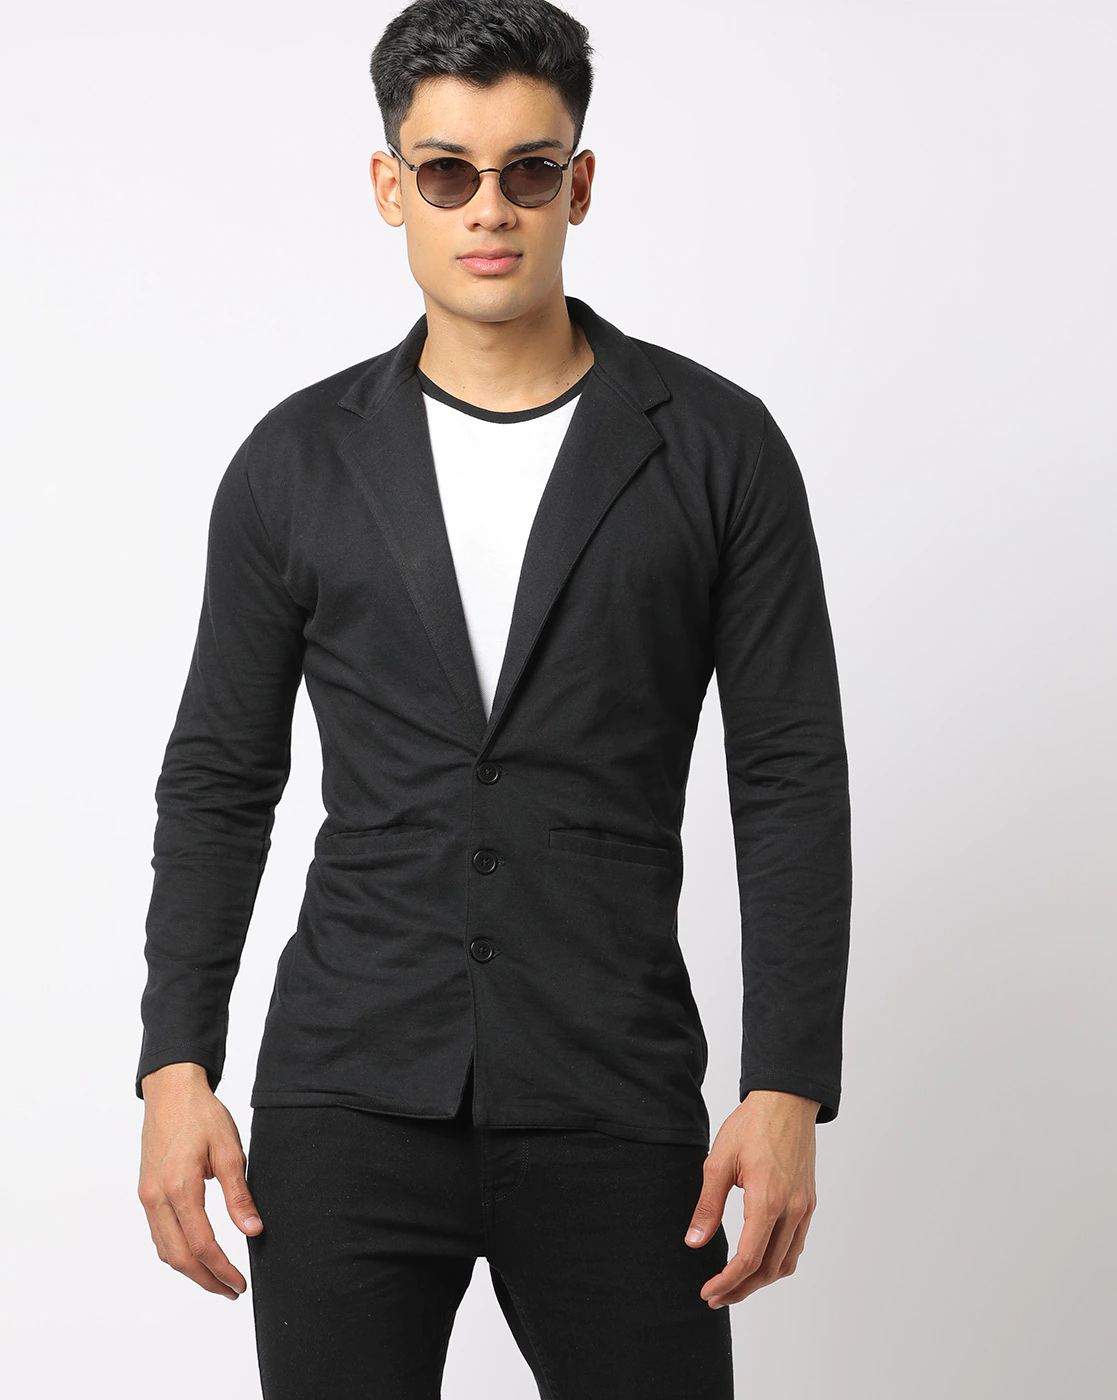 Black Single Breasted Blazer with Flap Pockets